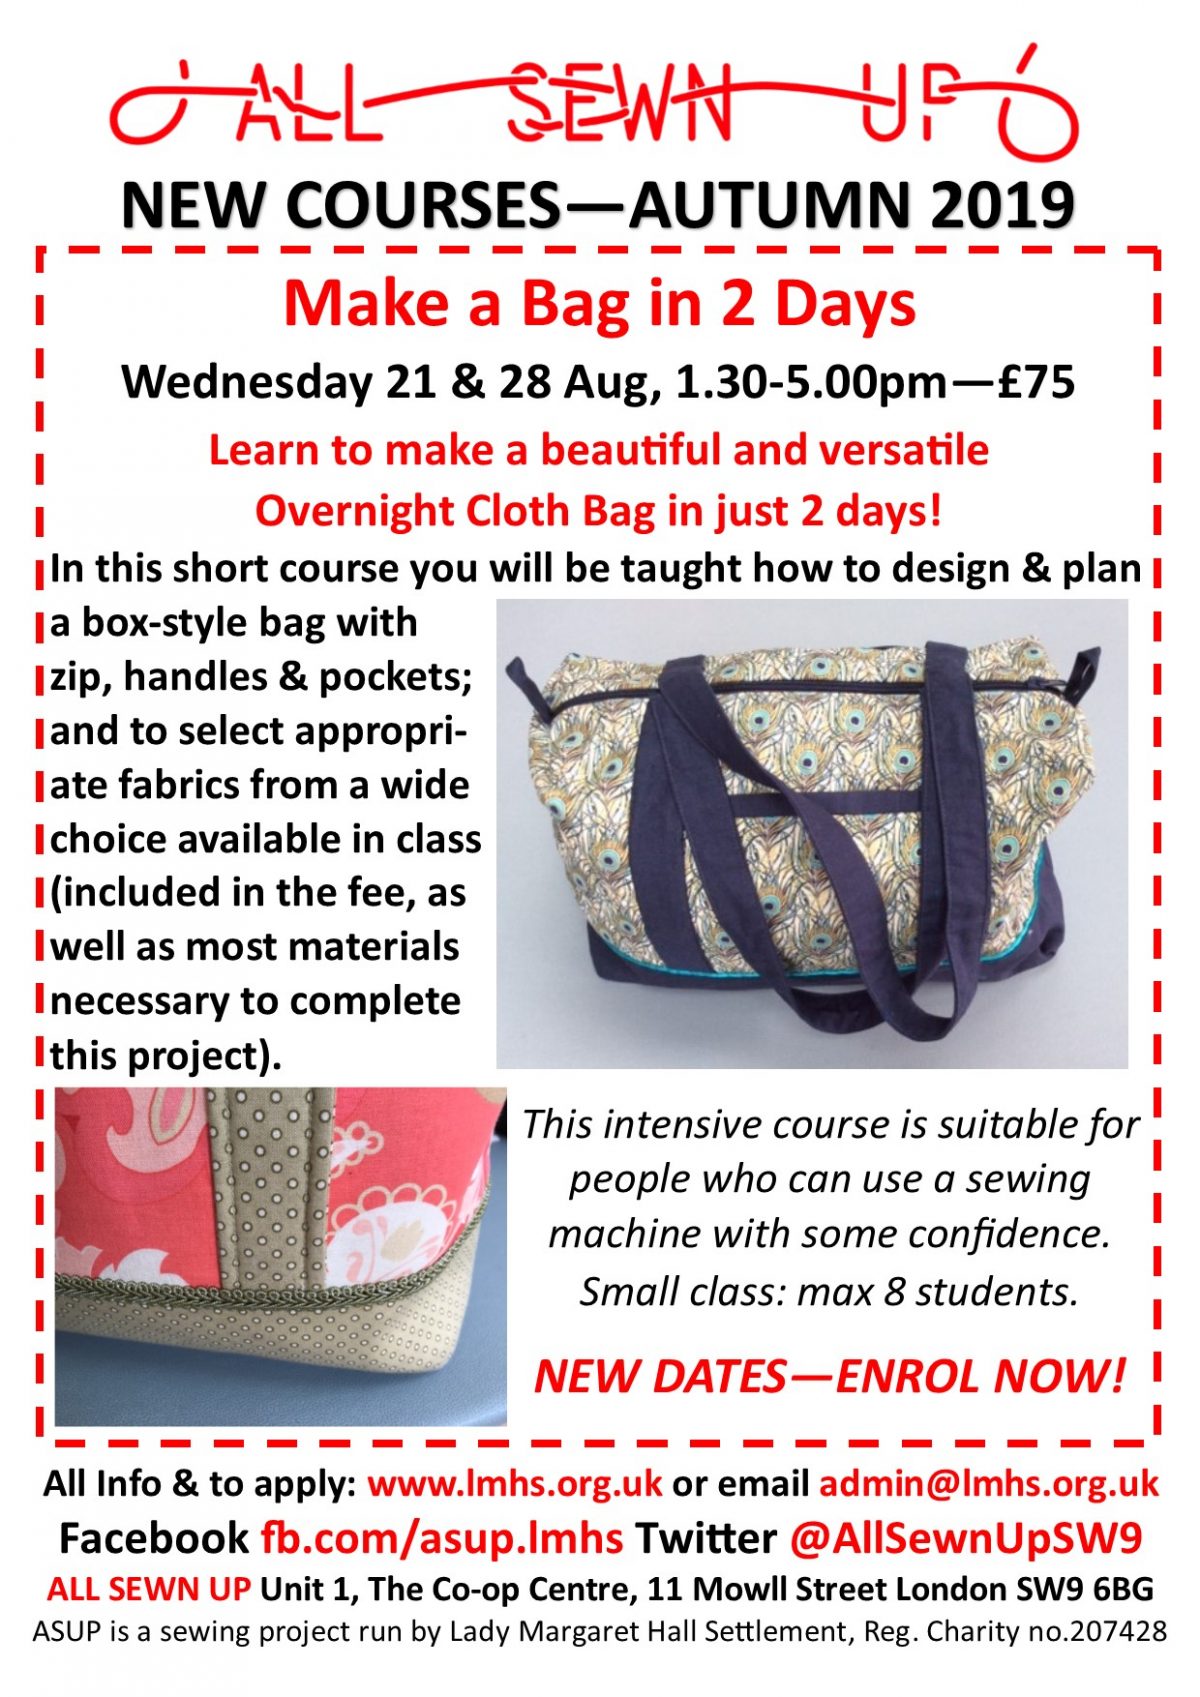 New dates for Make a Bag sewing course in August!